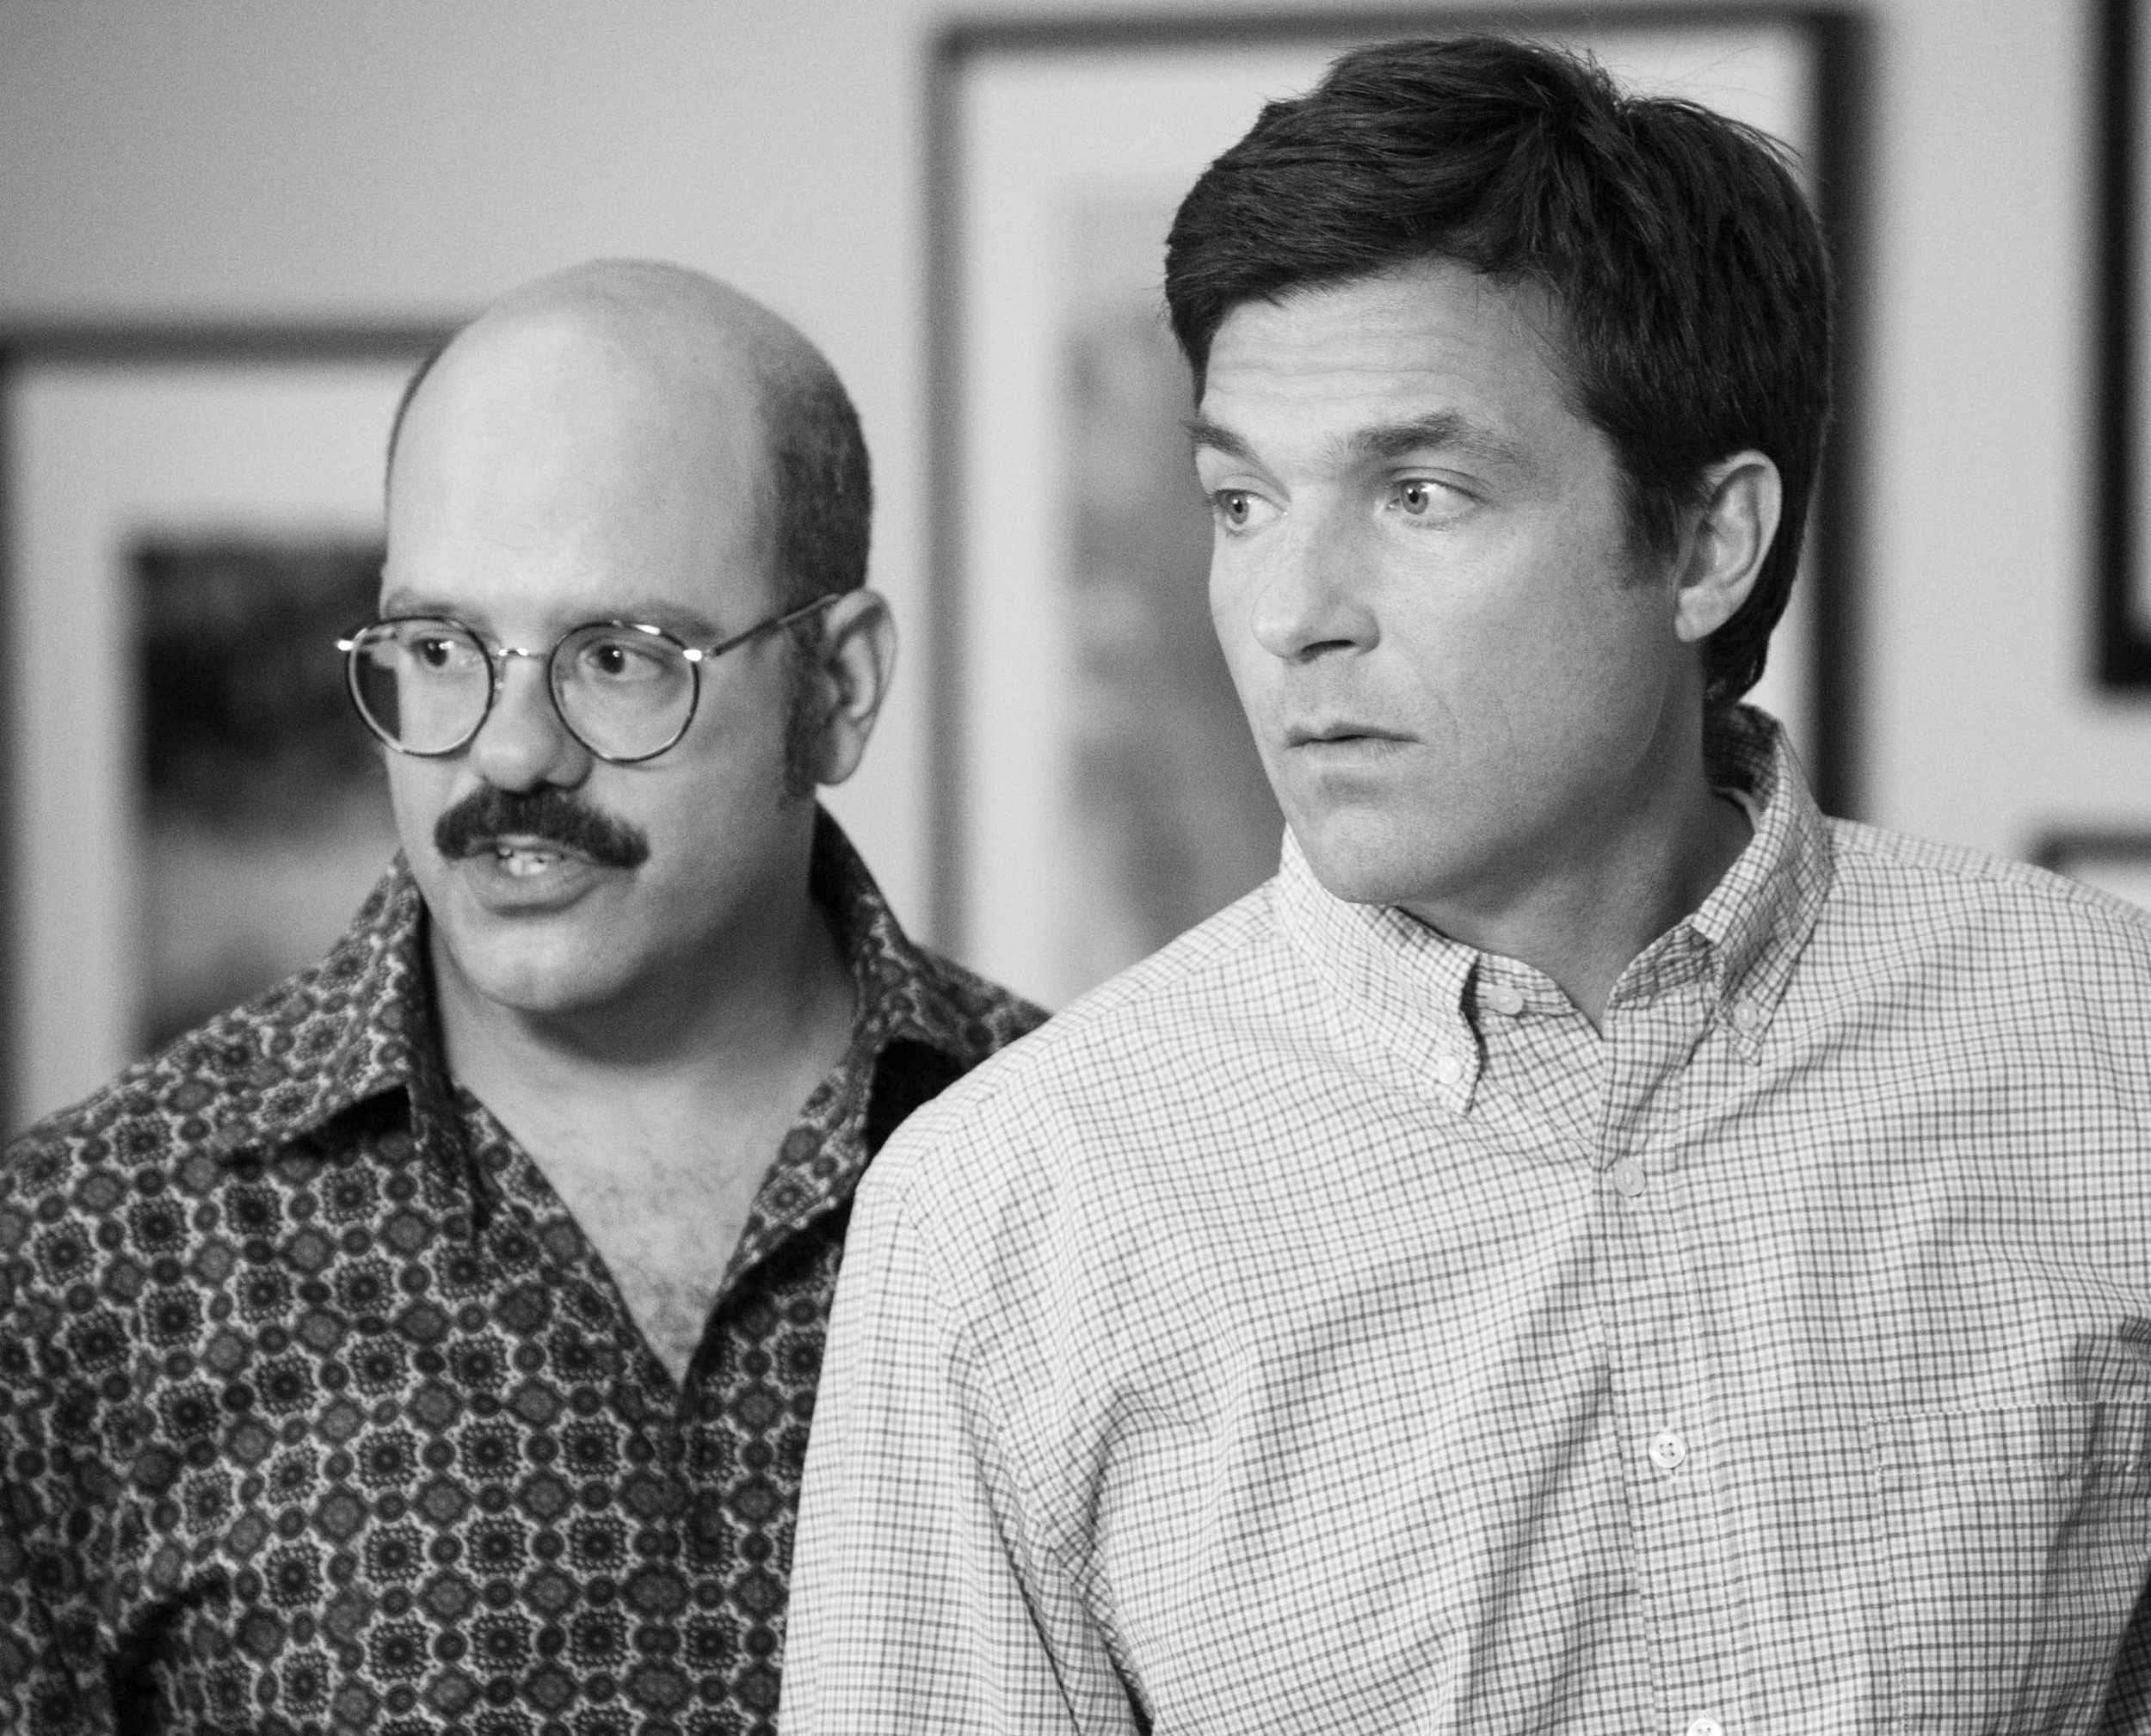 vulture.comDavid Cross and Jason Bateman return as Tobias Fünke and Michael Bluth in the Emmy-nominated fourth season of “Arrested Development” on Netflix, much to the delight of fans. “Arrested” is one of the series on Netflix that has earned an Em…